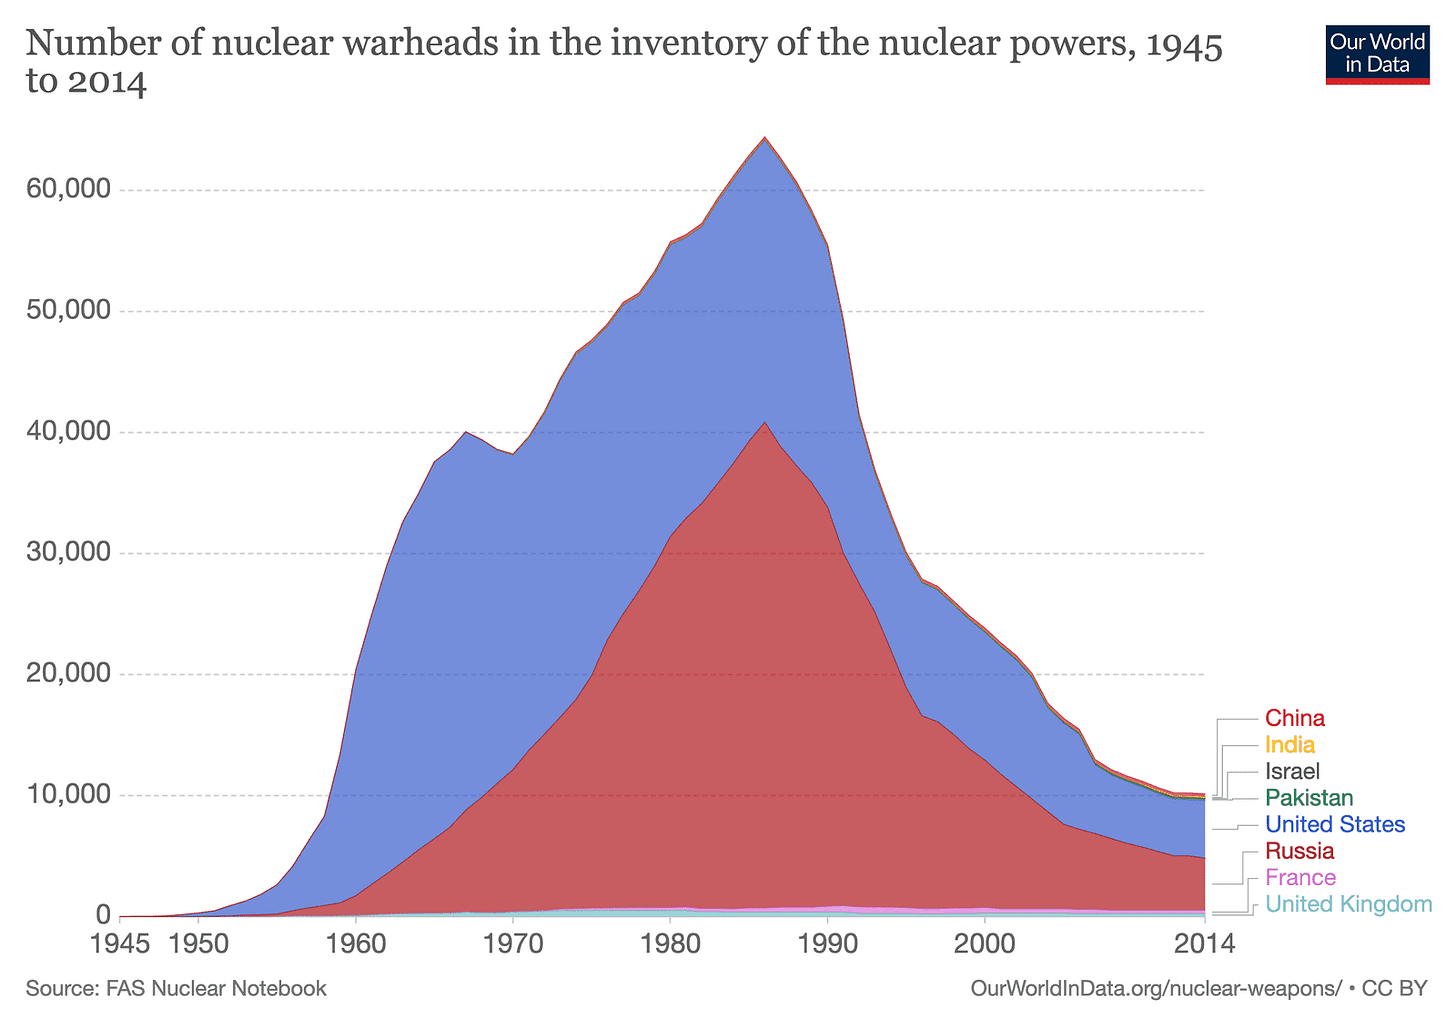 [Number of nuclear warheads in the inventory of the nuclear powers, 1945 to 2014](/Users/finmoorhouse/dev/hti/src/episodes/25-thomas-moynihan/images/stockpiles.png)